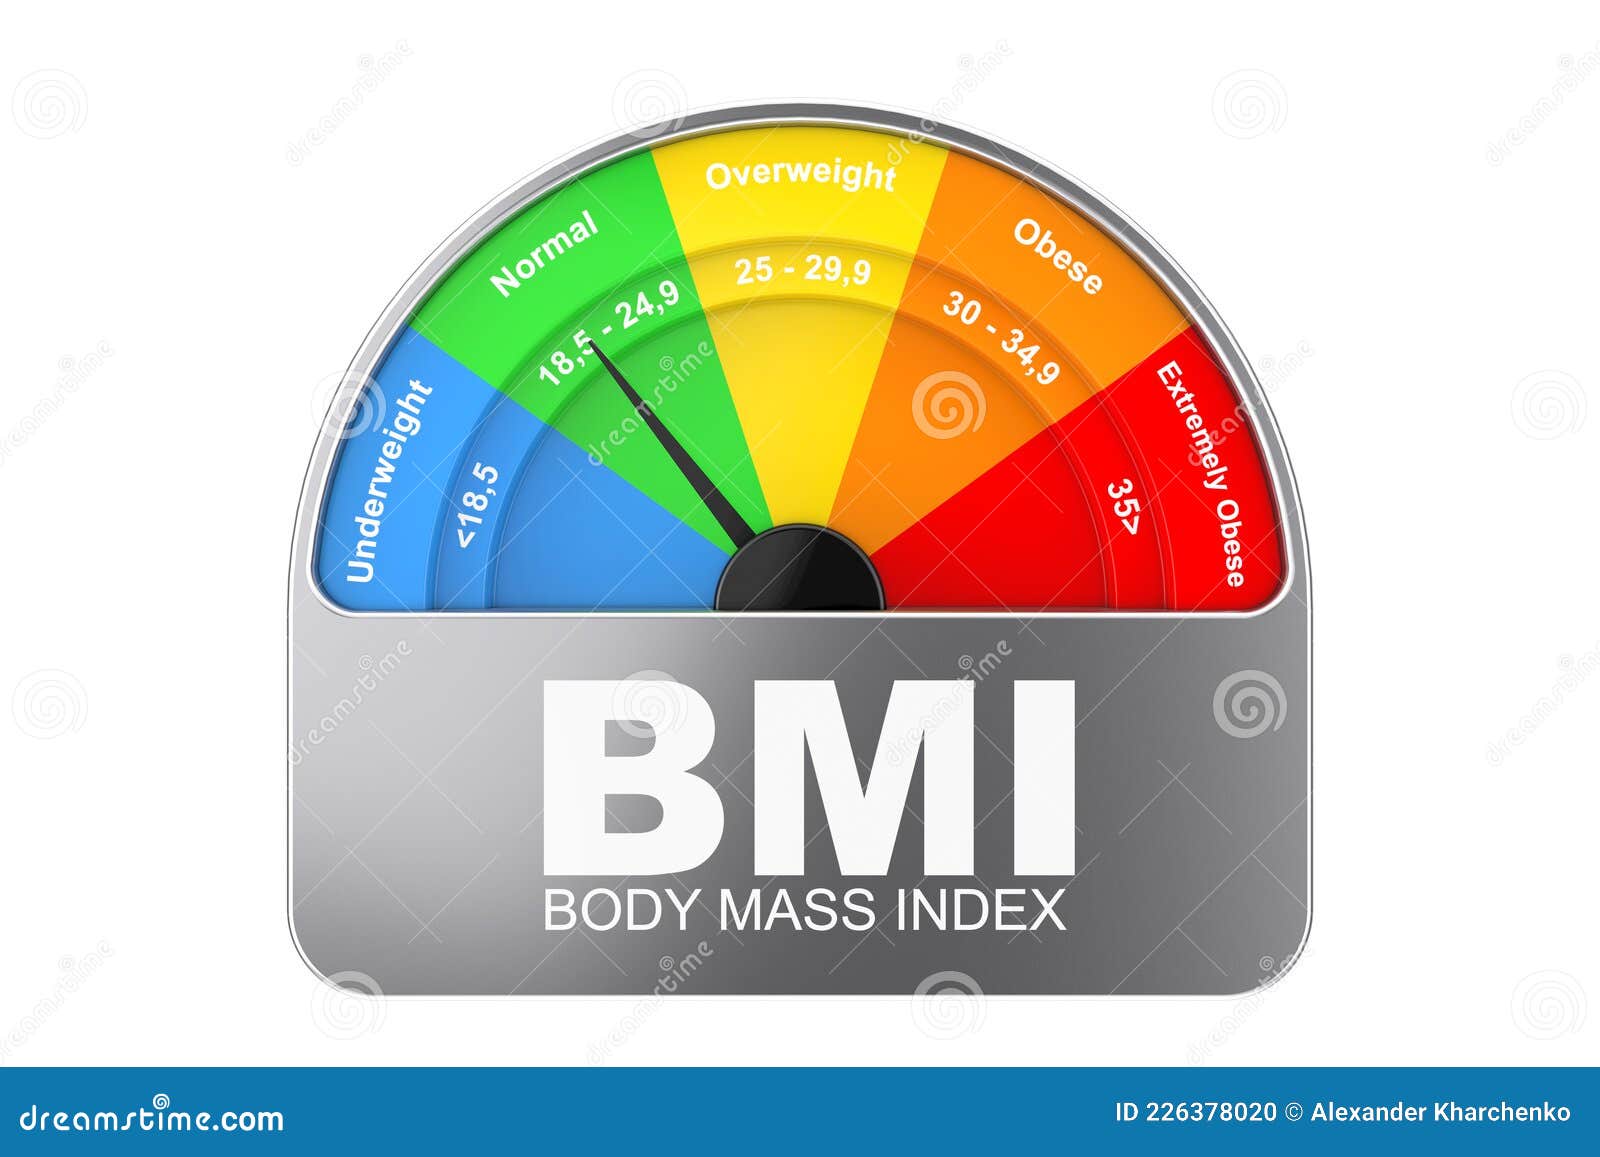 https://thumbs.dreamstime.com/z/bmi-body-mass-index-scale-meter-dial-gage-icon-d-rendering-bmi-body-mass-index-scale-meter-dial-gage-icon-white-226378020.jpg